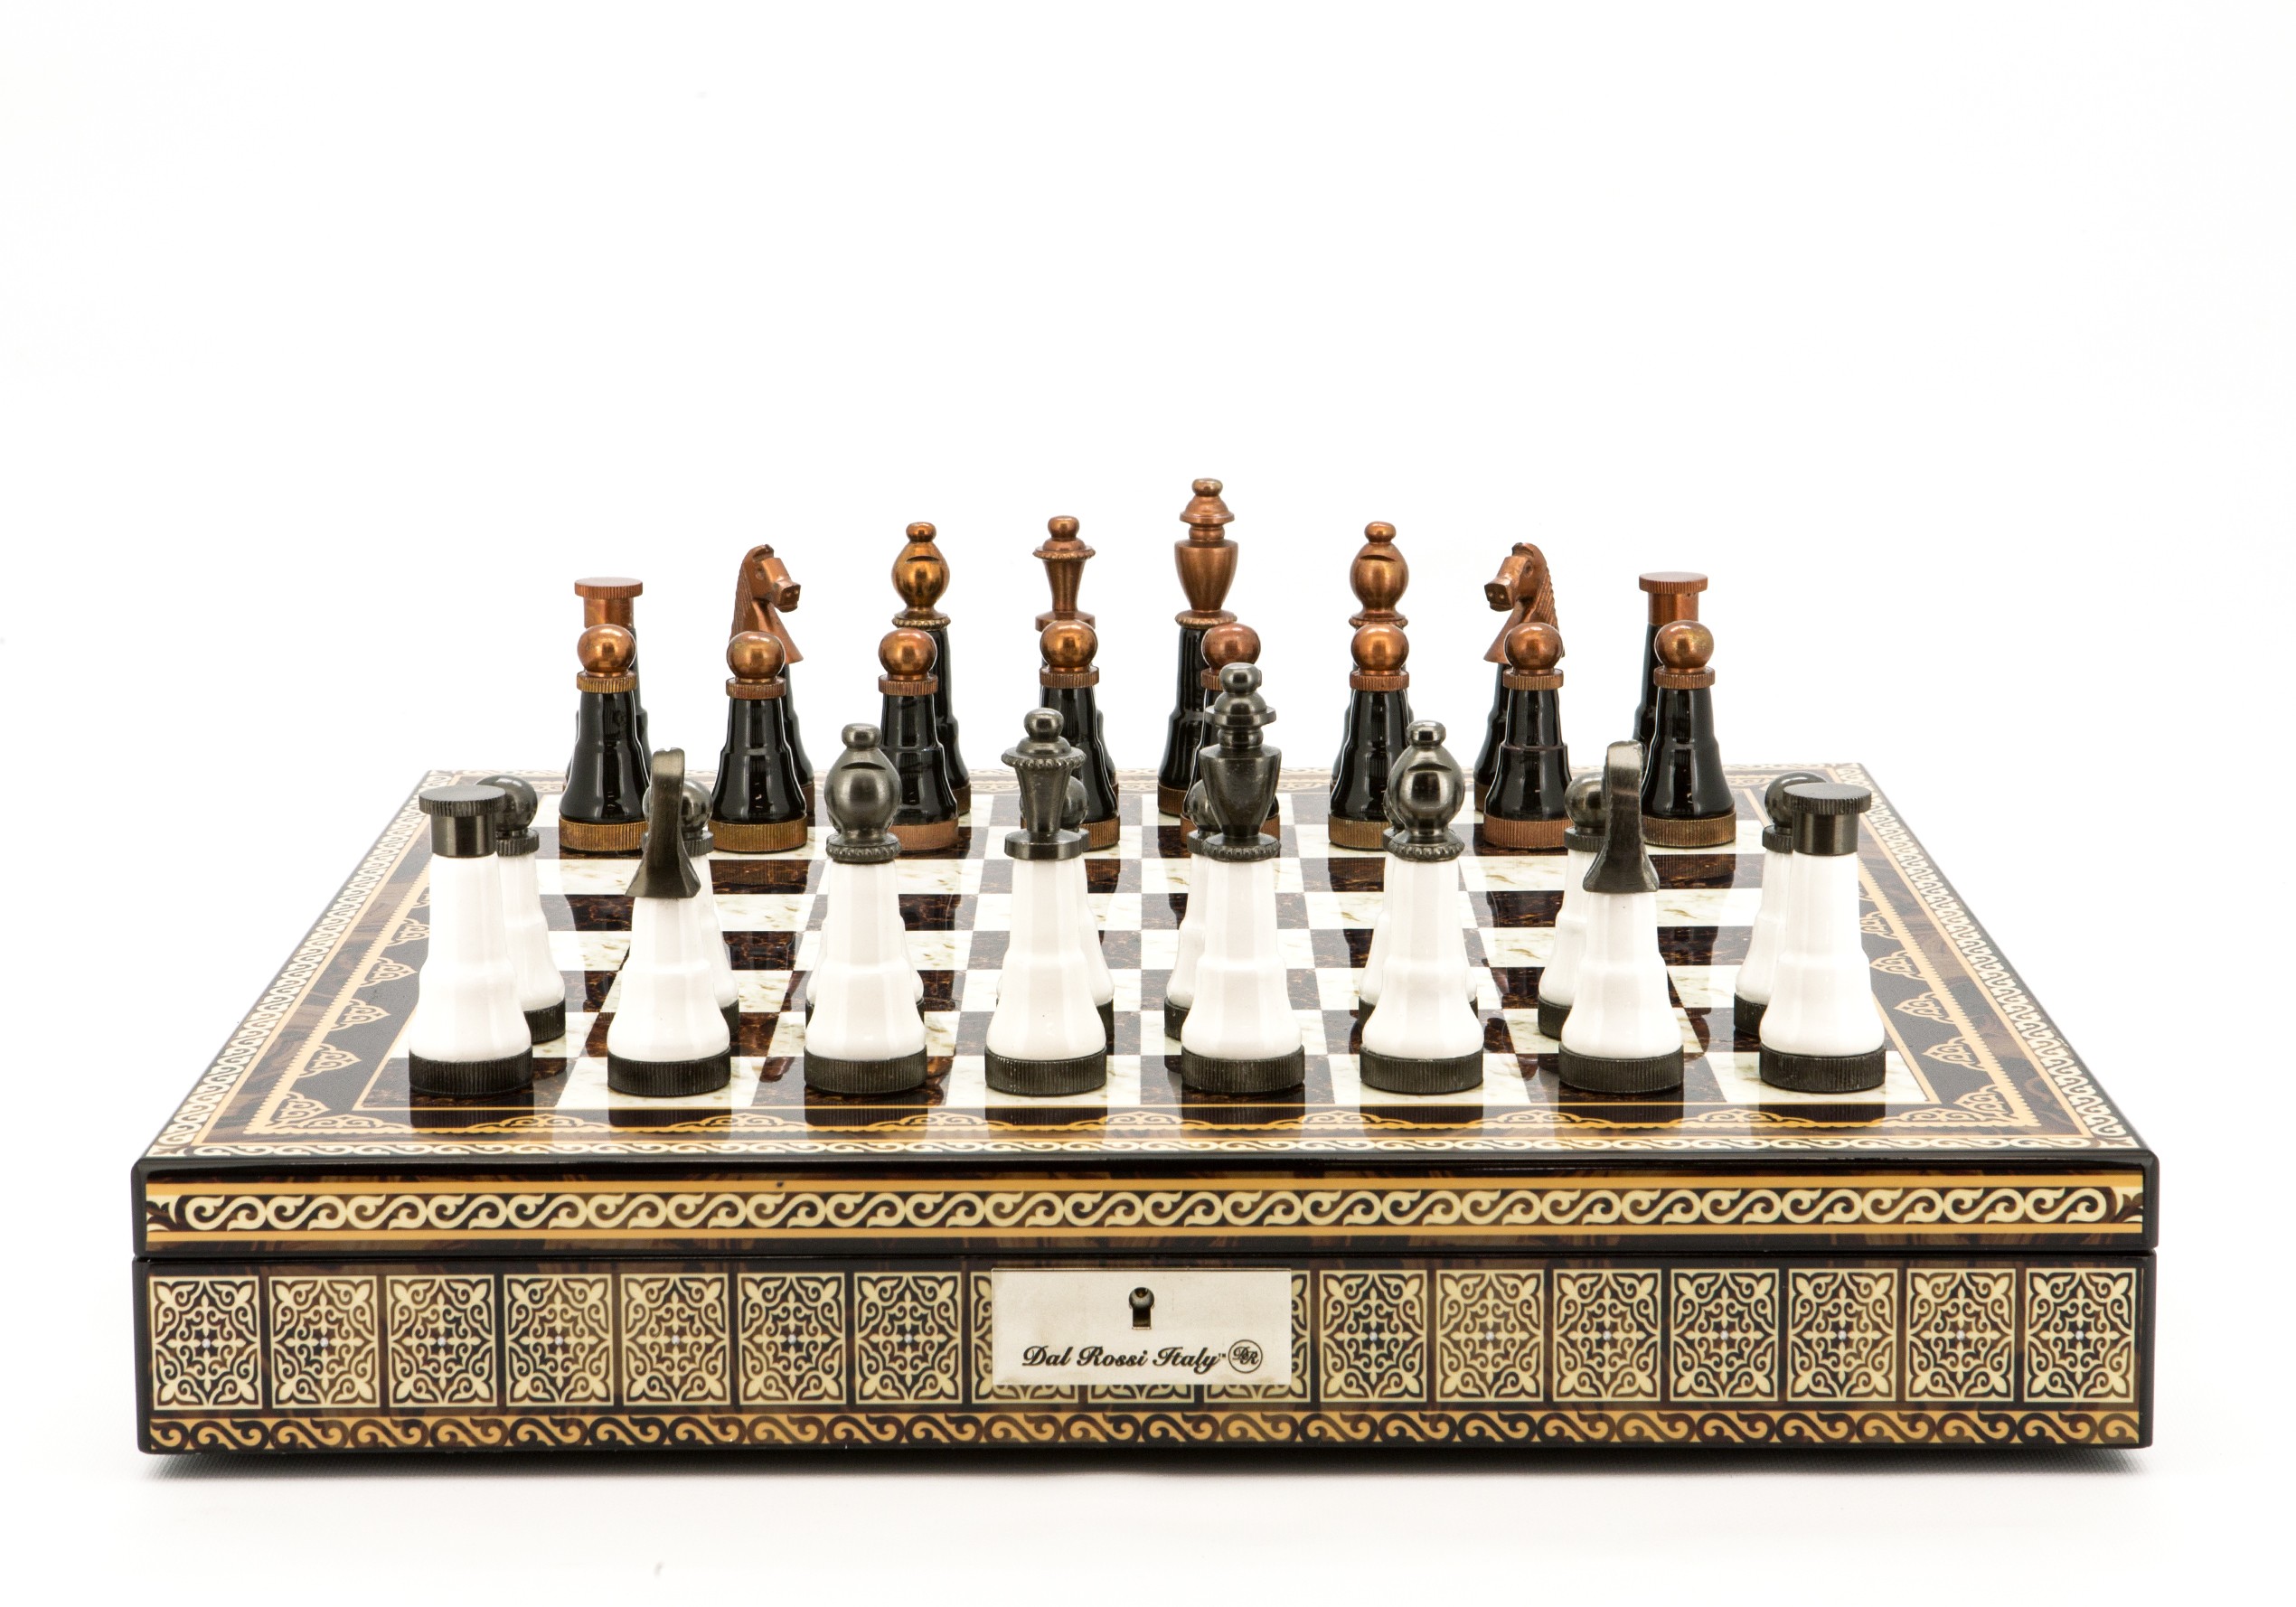 Dal Rossi Italy Chess Set Mosaic Finish 20″ With Compartments, With Black and White with Copper and Gun Metal Gray Tops and Bottoms Chess Pieces 110mm 